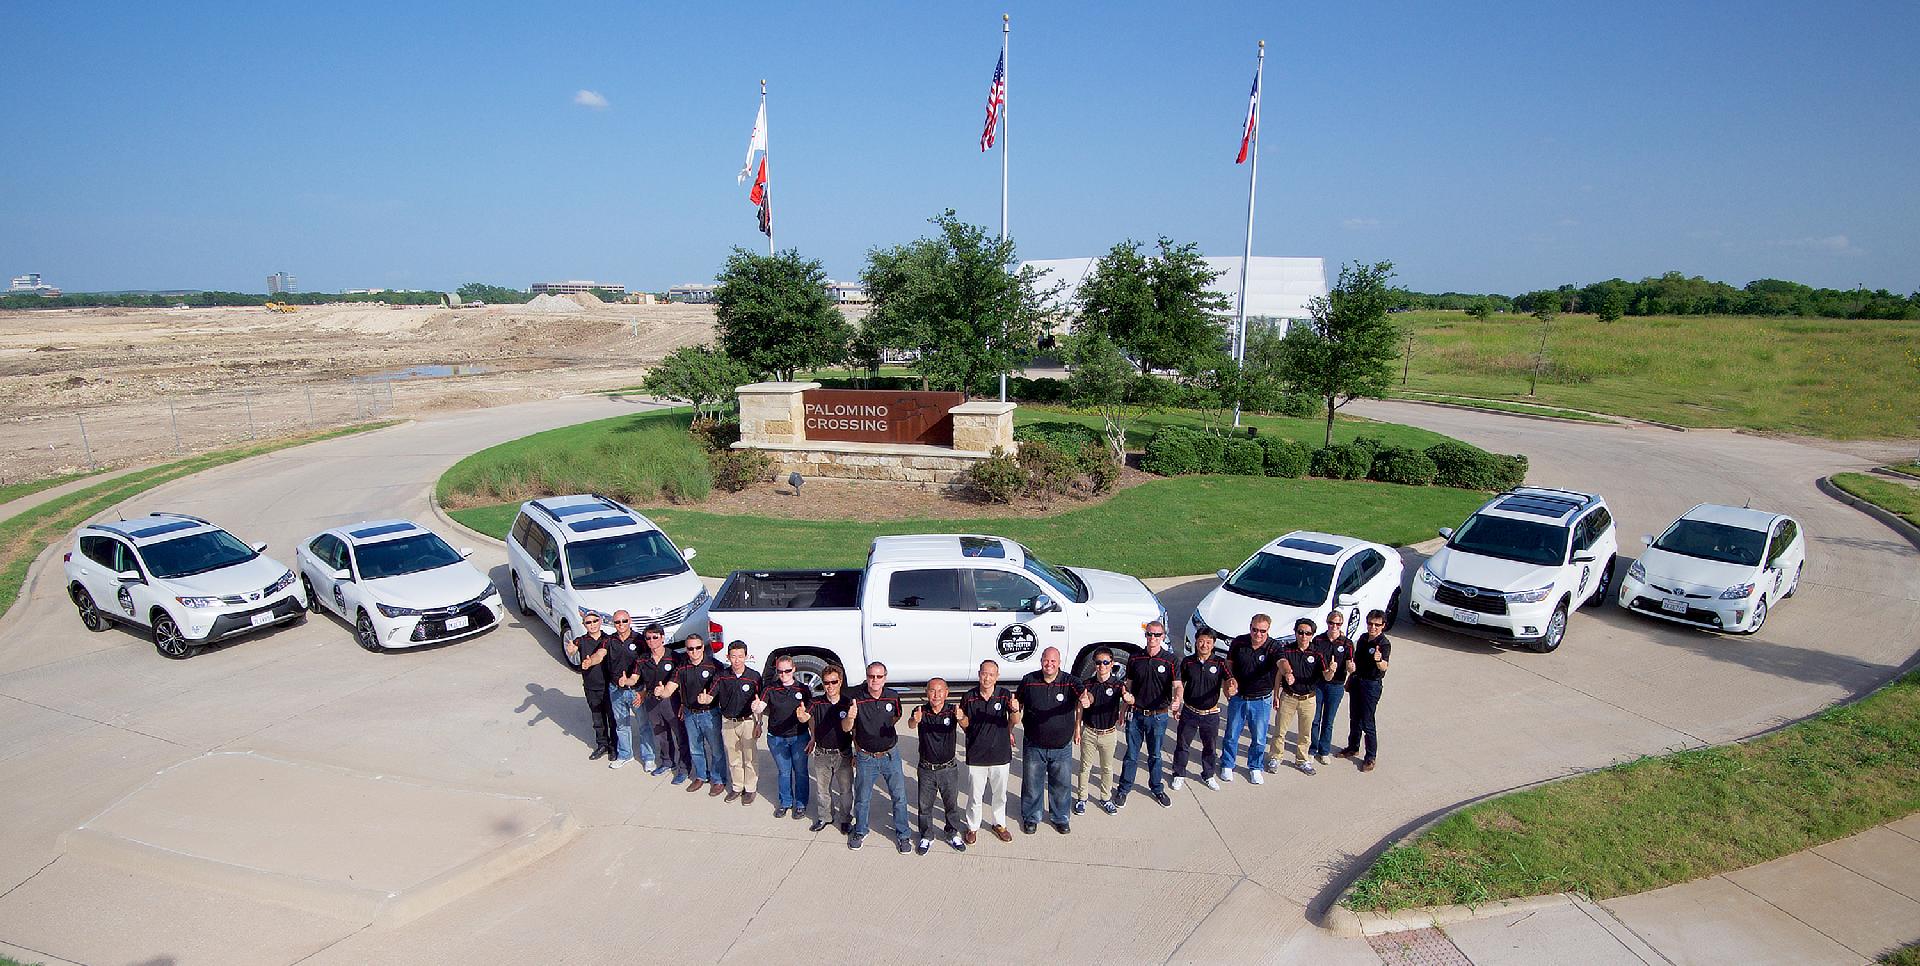 Toyota Ever-Better Expedition – North American Engineers and Team Members